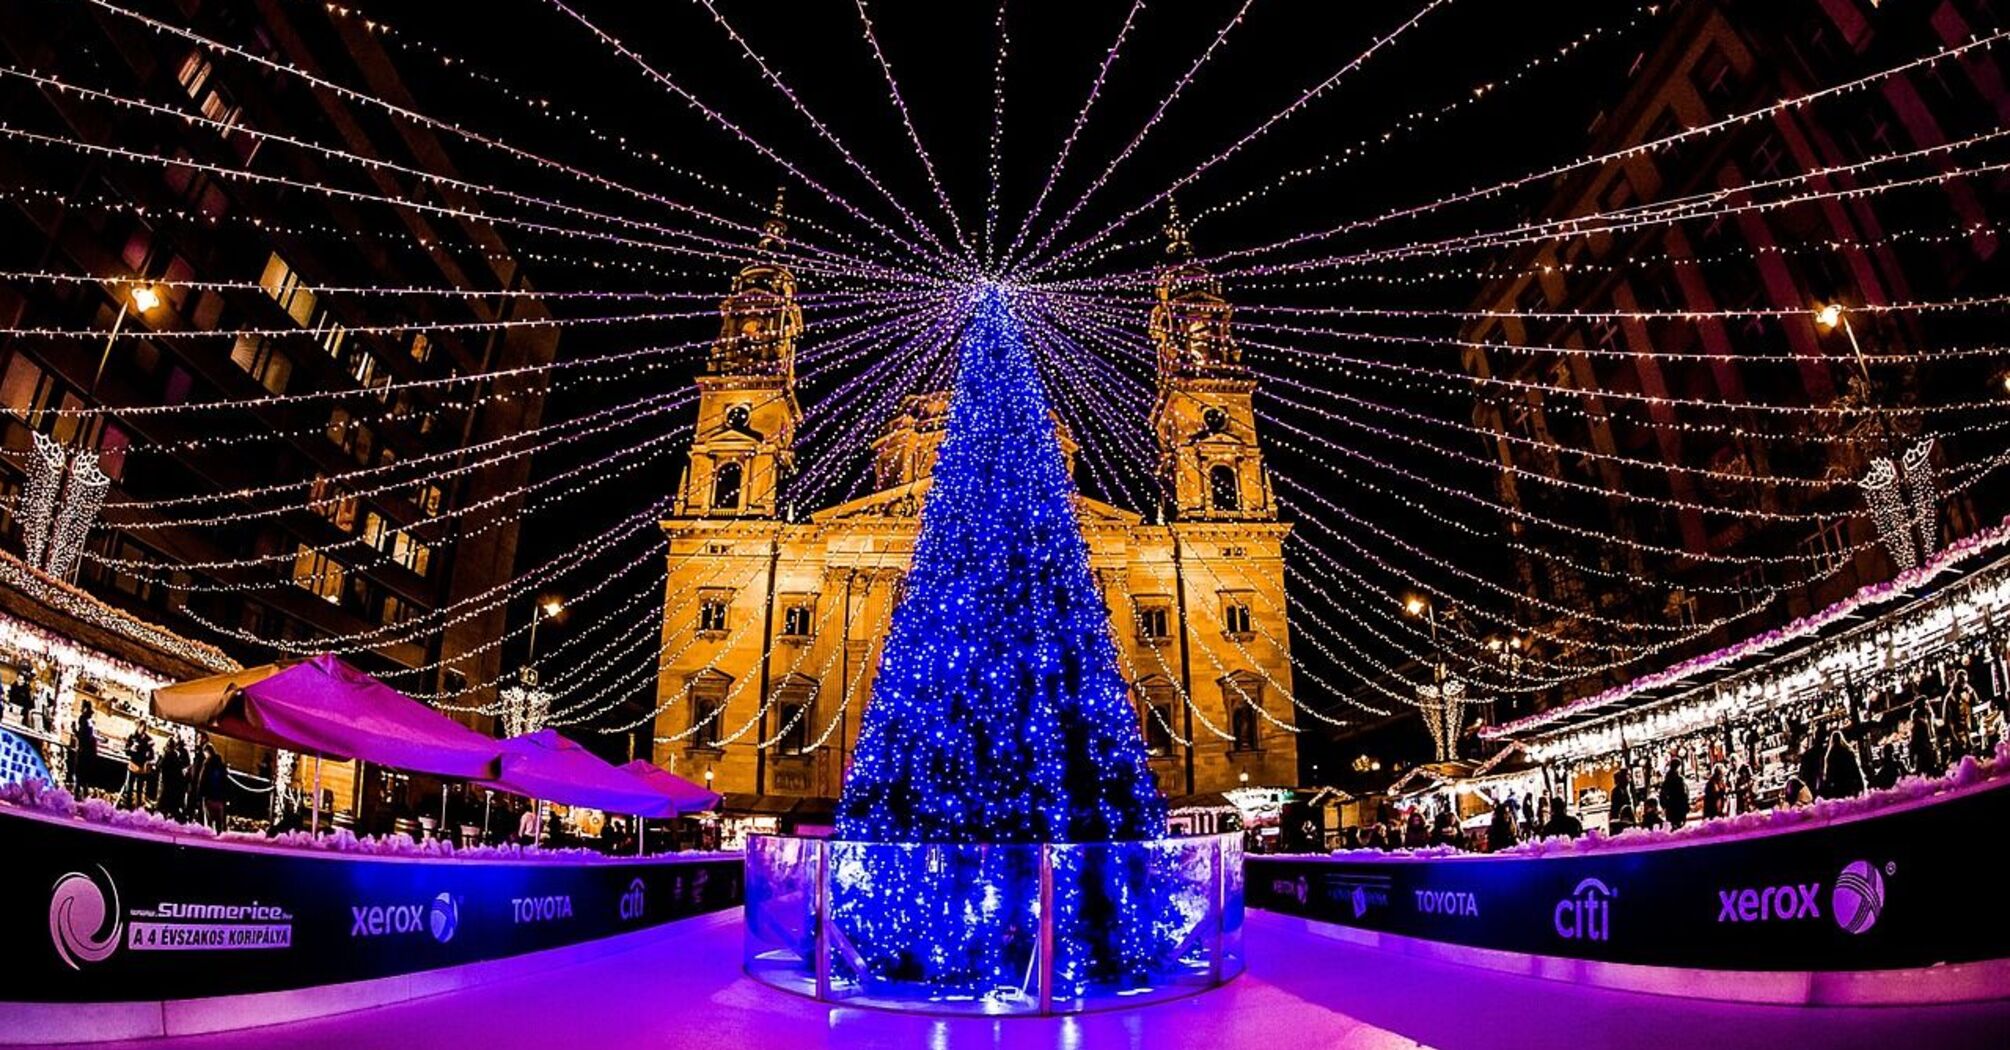 Christmas market in Budapest has not-too-high prices considering European standards